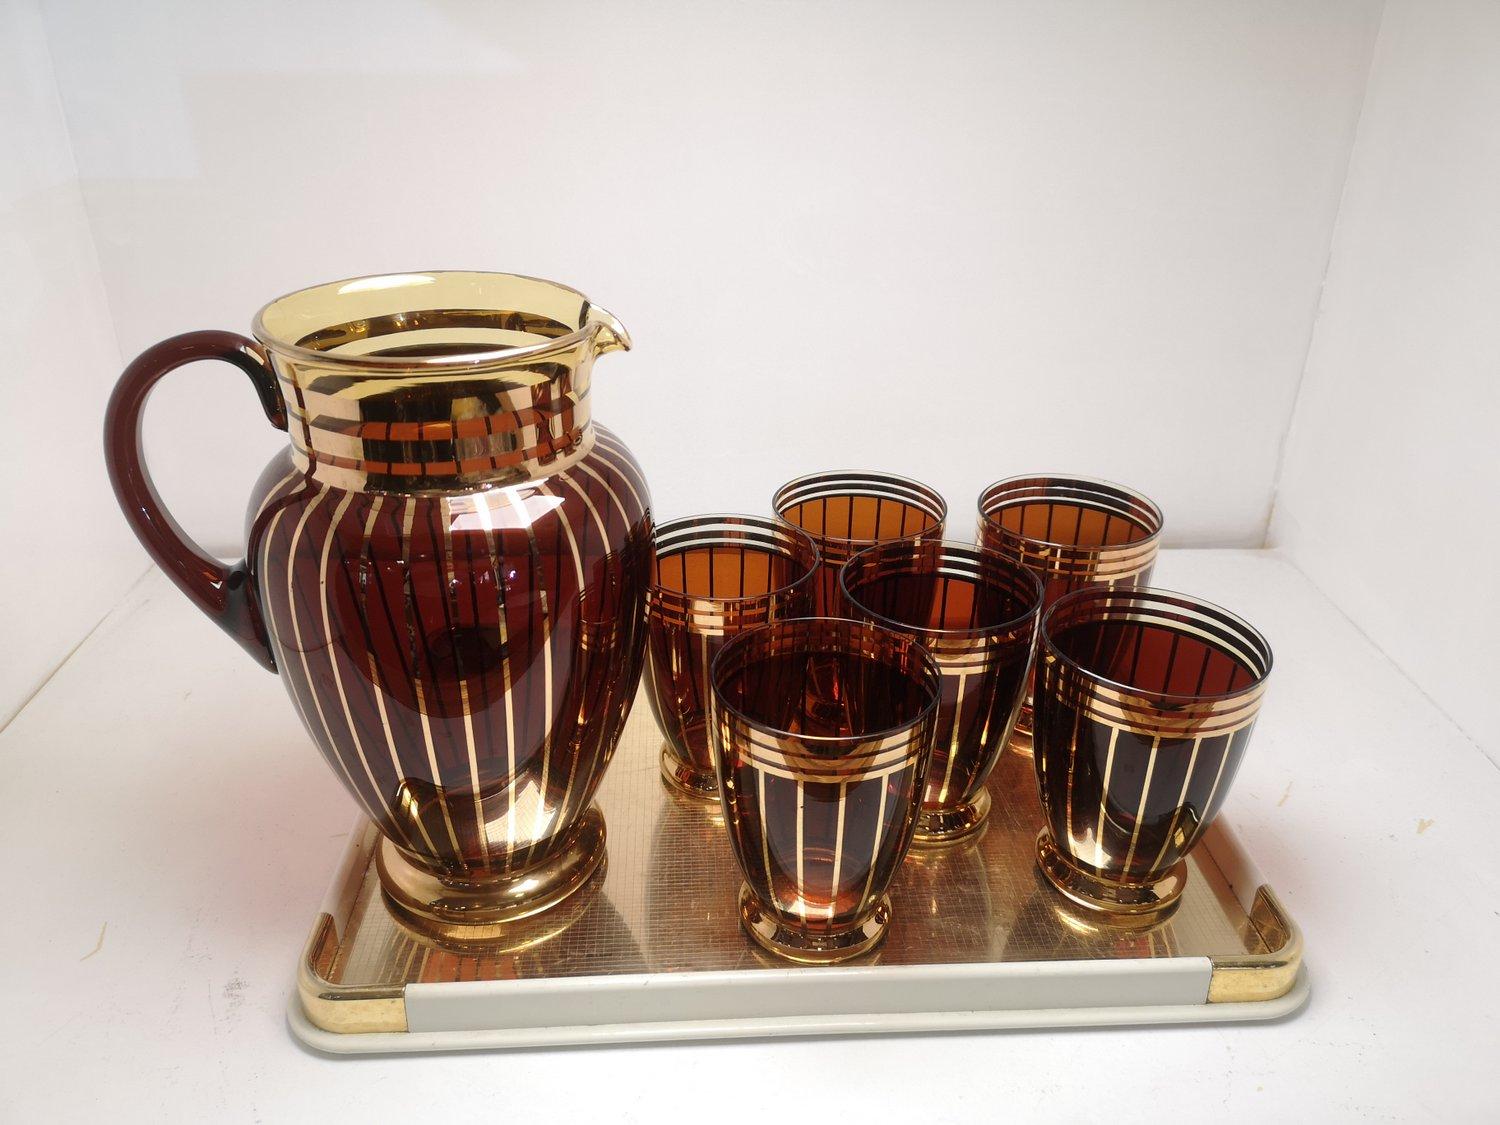 Special serving set with brown glass lemonade pitcher and 6 glasses,
gilded decor from the 1960s. This set is in perfect, beautiful condition. An excellent gift for garden parties.
Dimensions:
Tray: Width: 35cm, Depth: 25cm, Height: 3cm
Pitcher: